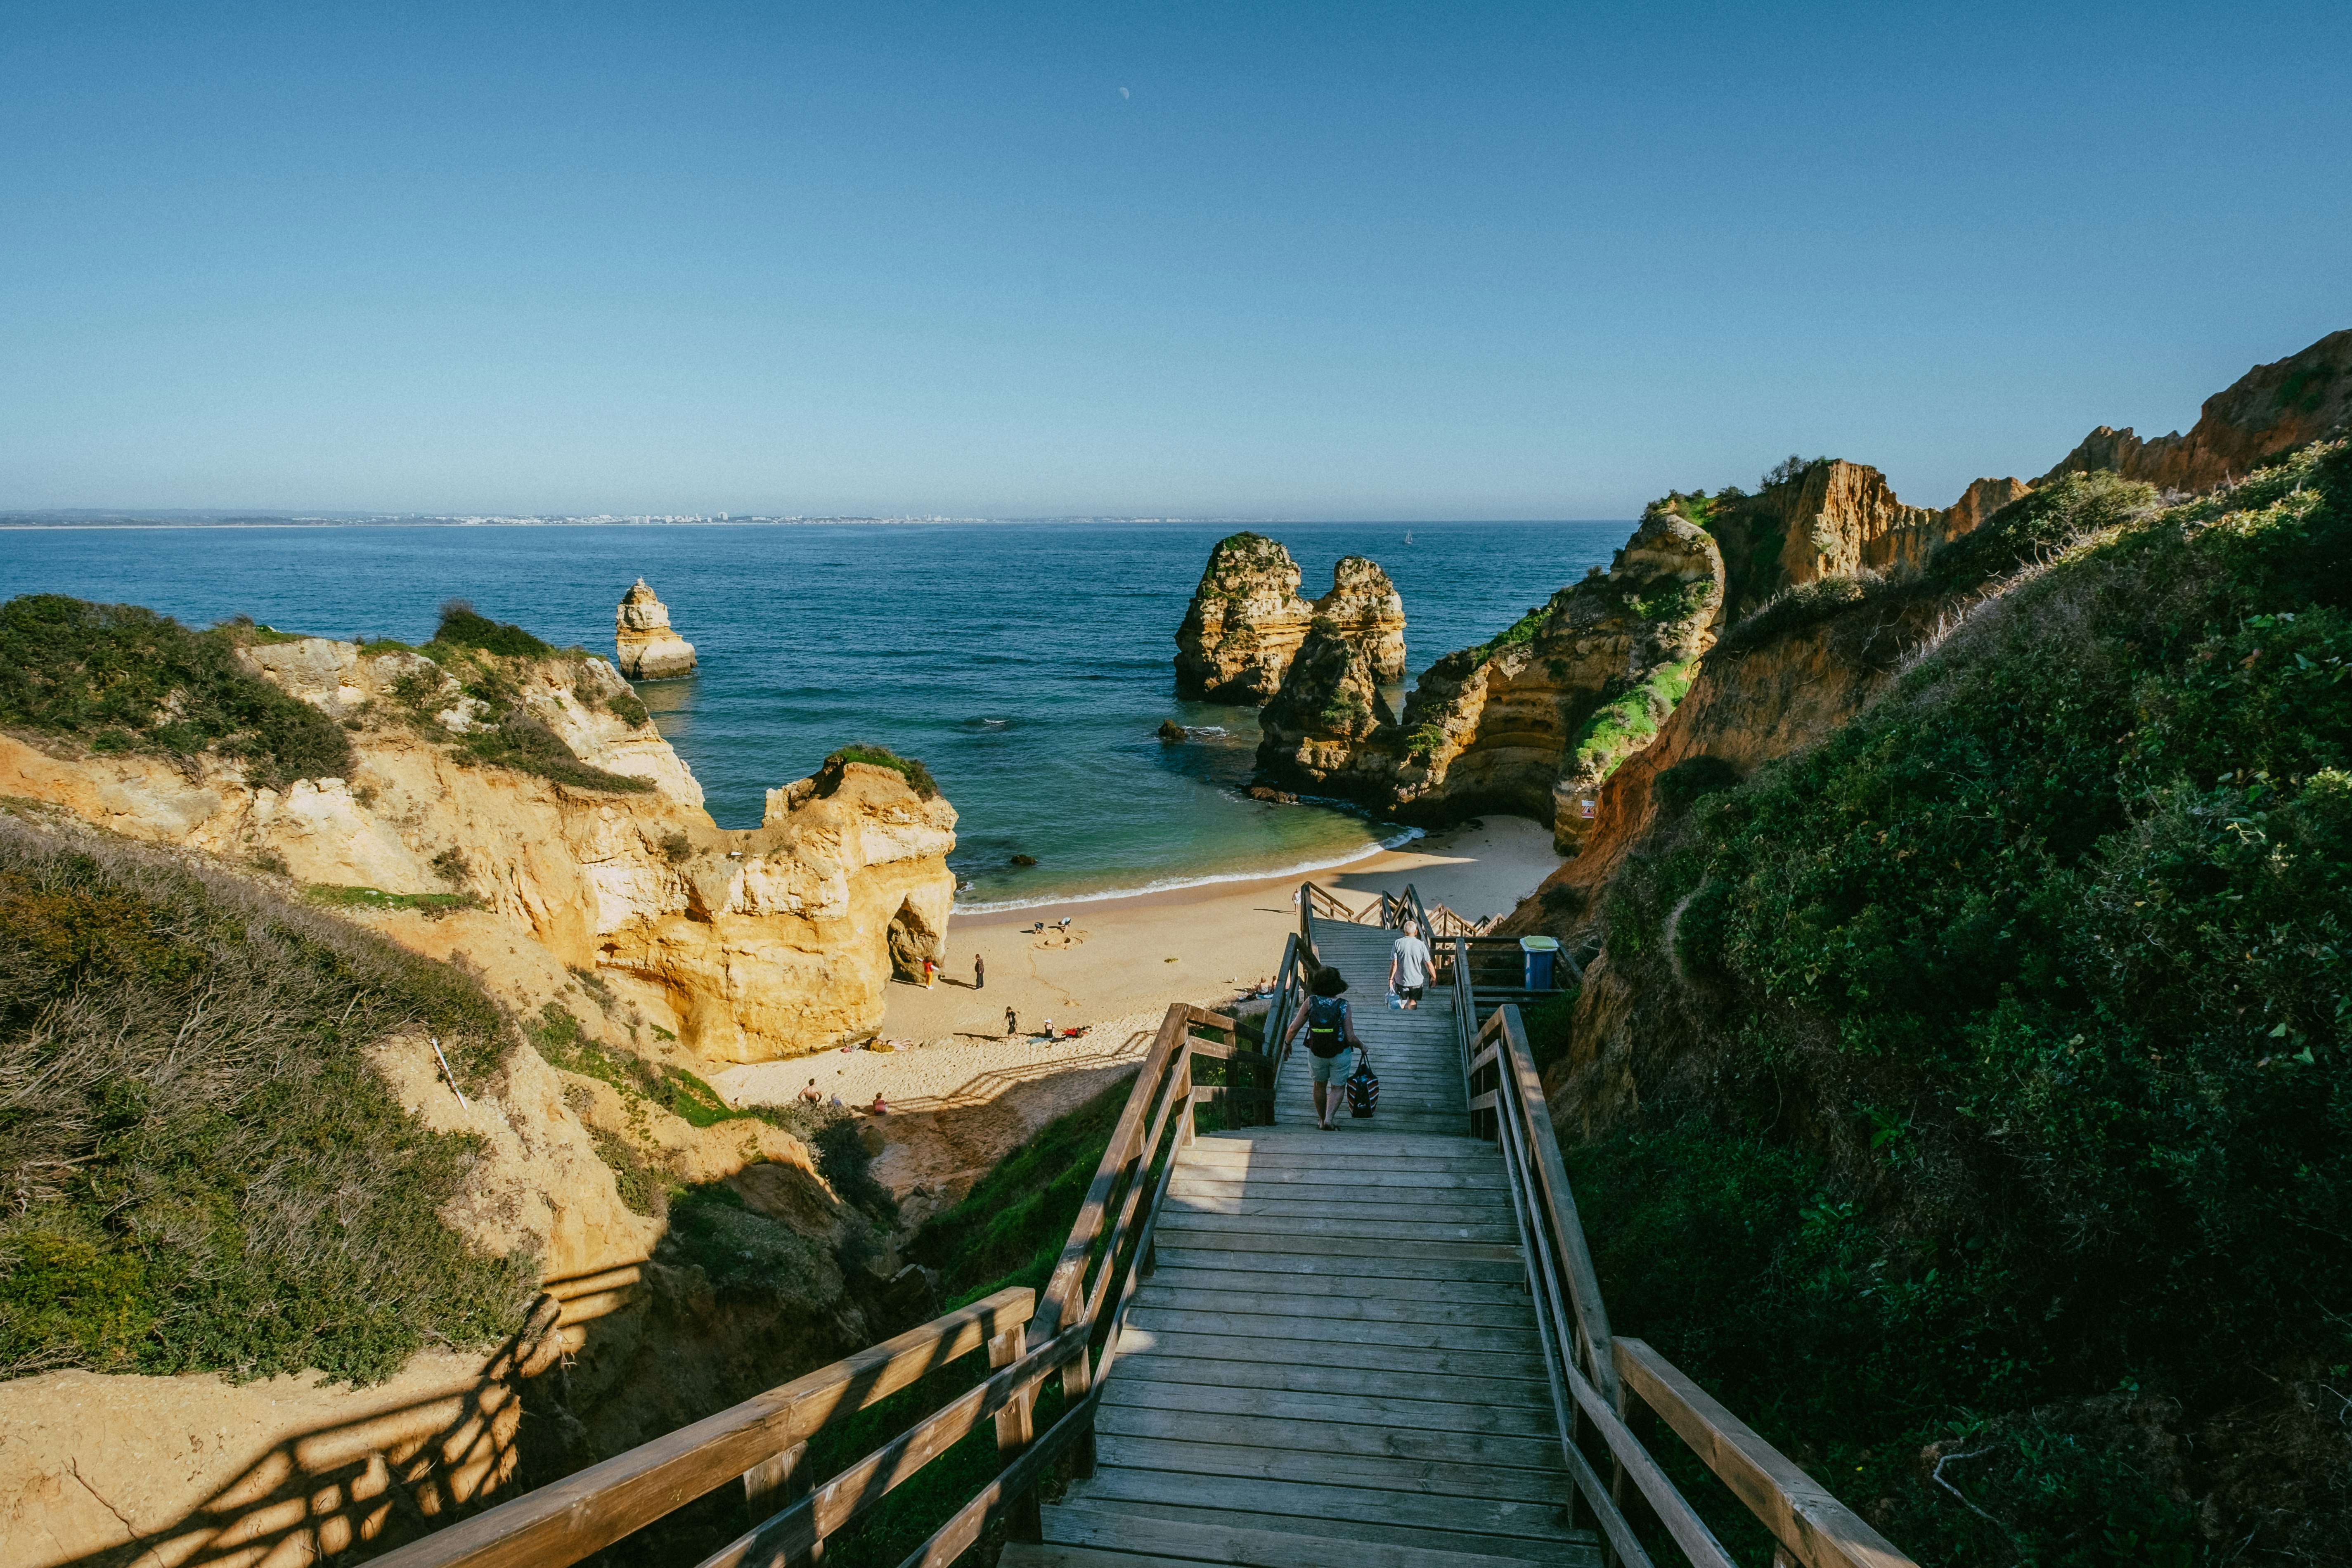 A few people walk down a set of wooden steps towards the sheltered sands of Praia do Camilo.